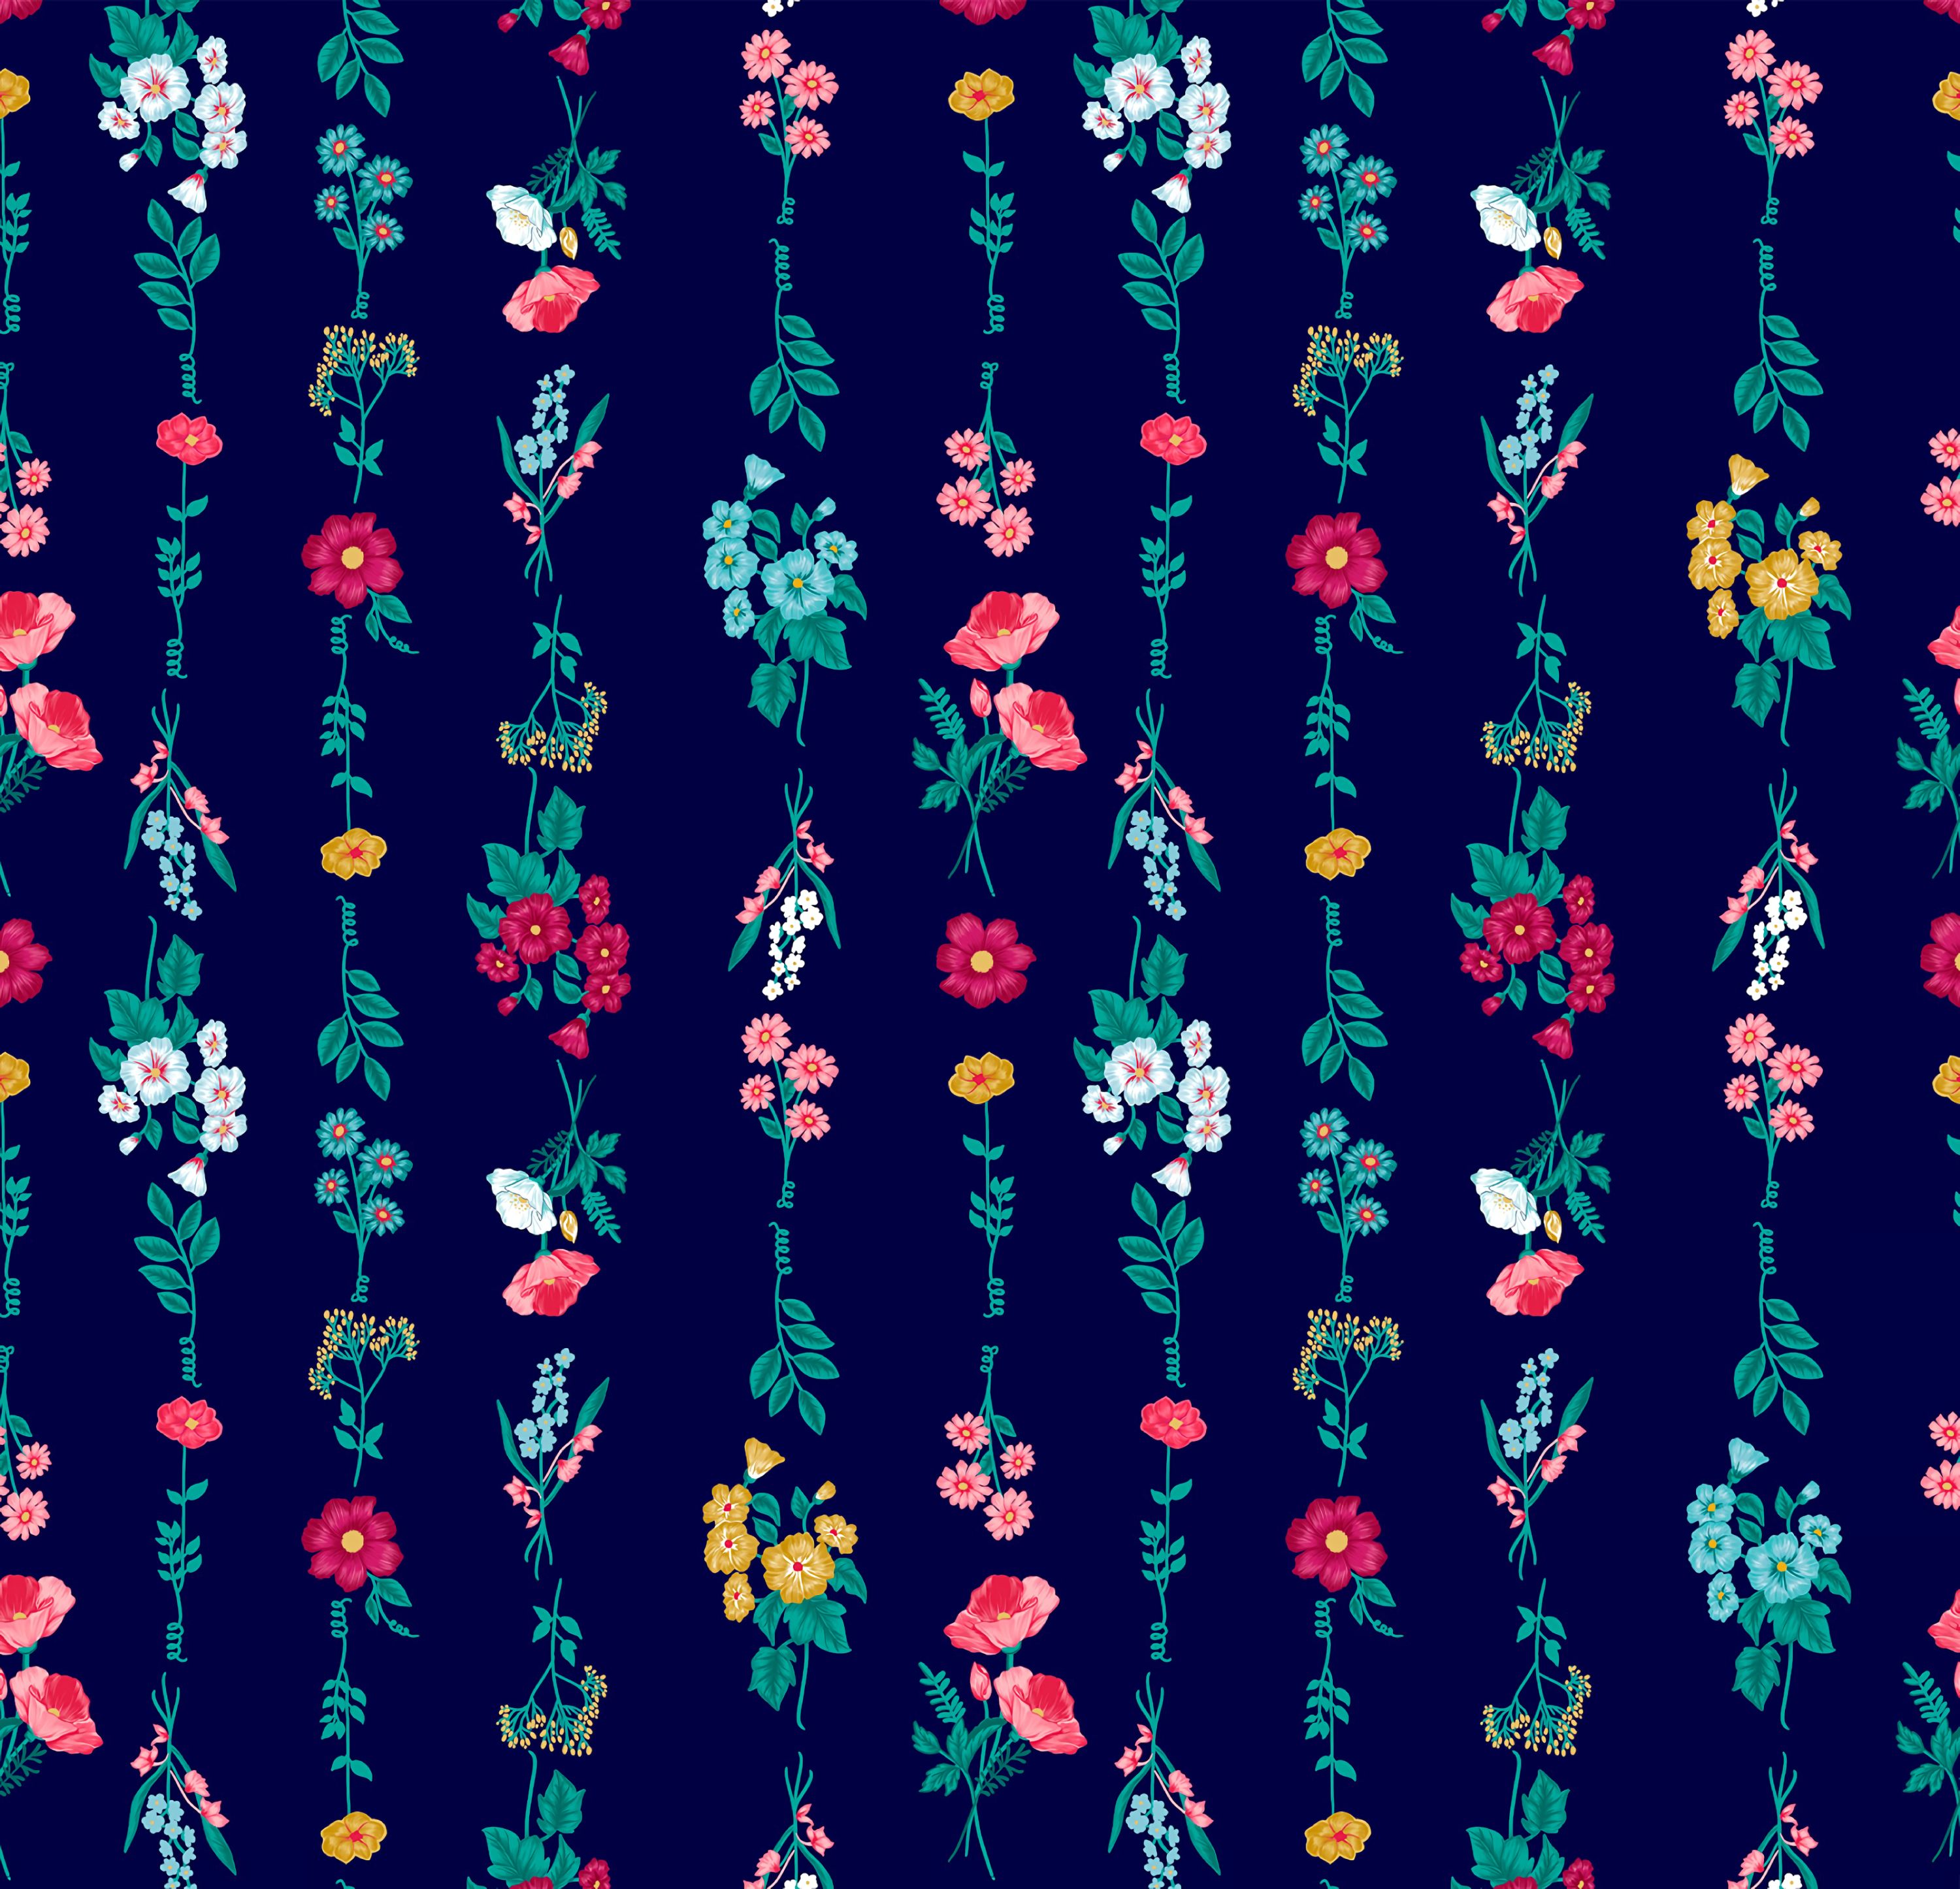 pattern, motley, flowers, texture, bouquets, multicolored, textures